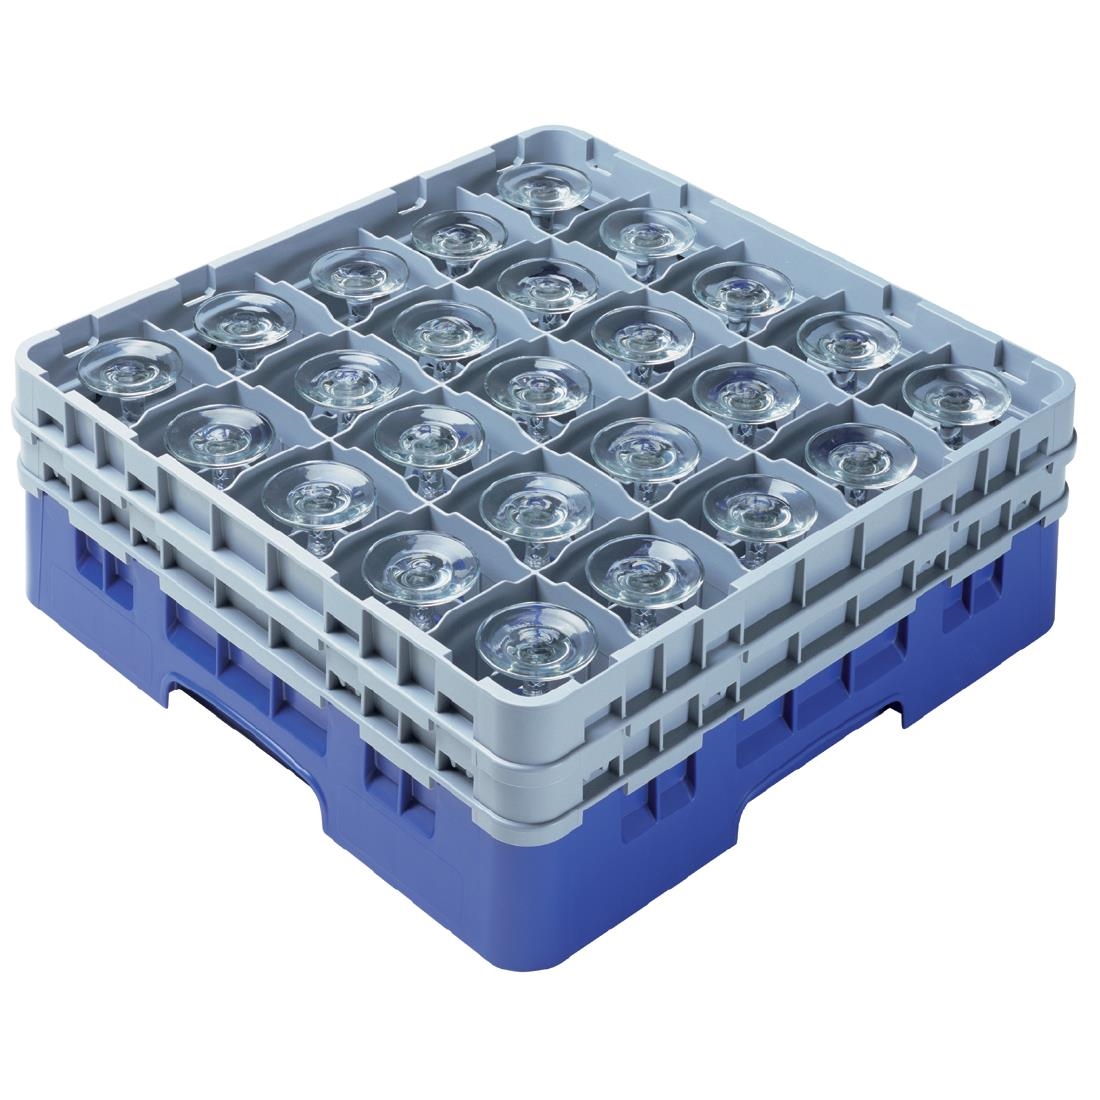 Cambro Camrack Blue 36 Compartments Max Glass Height 273mm